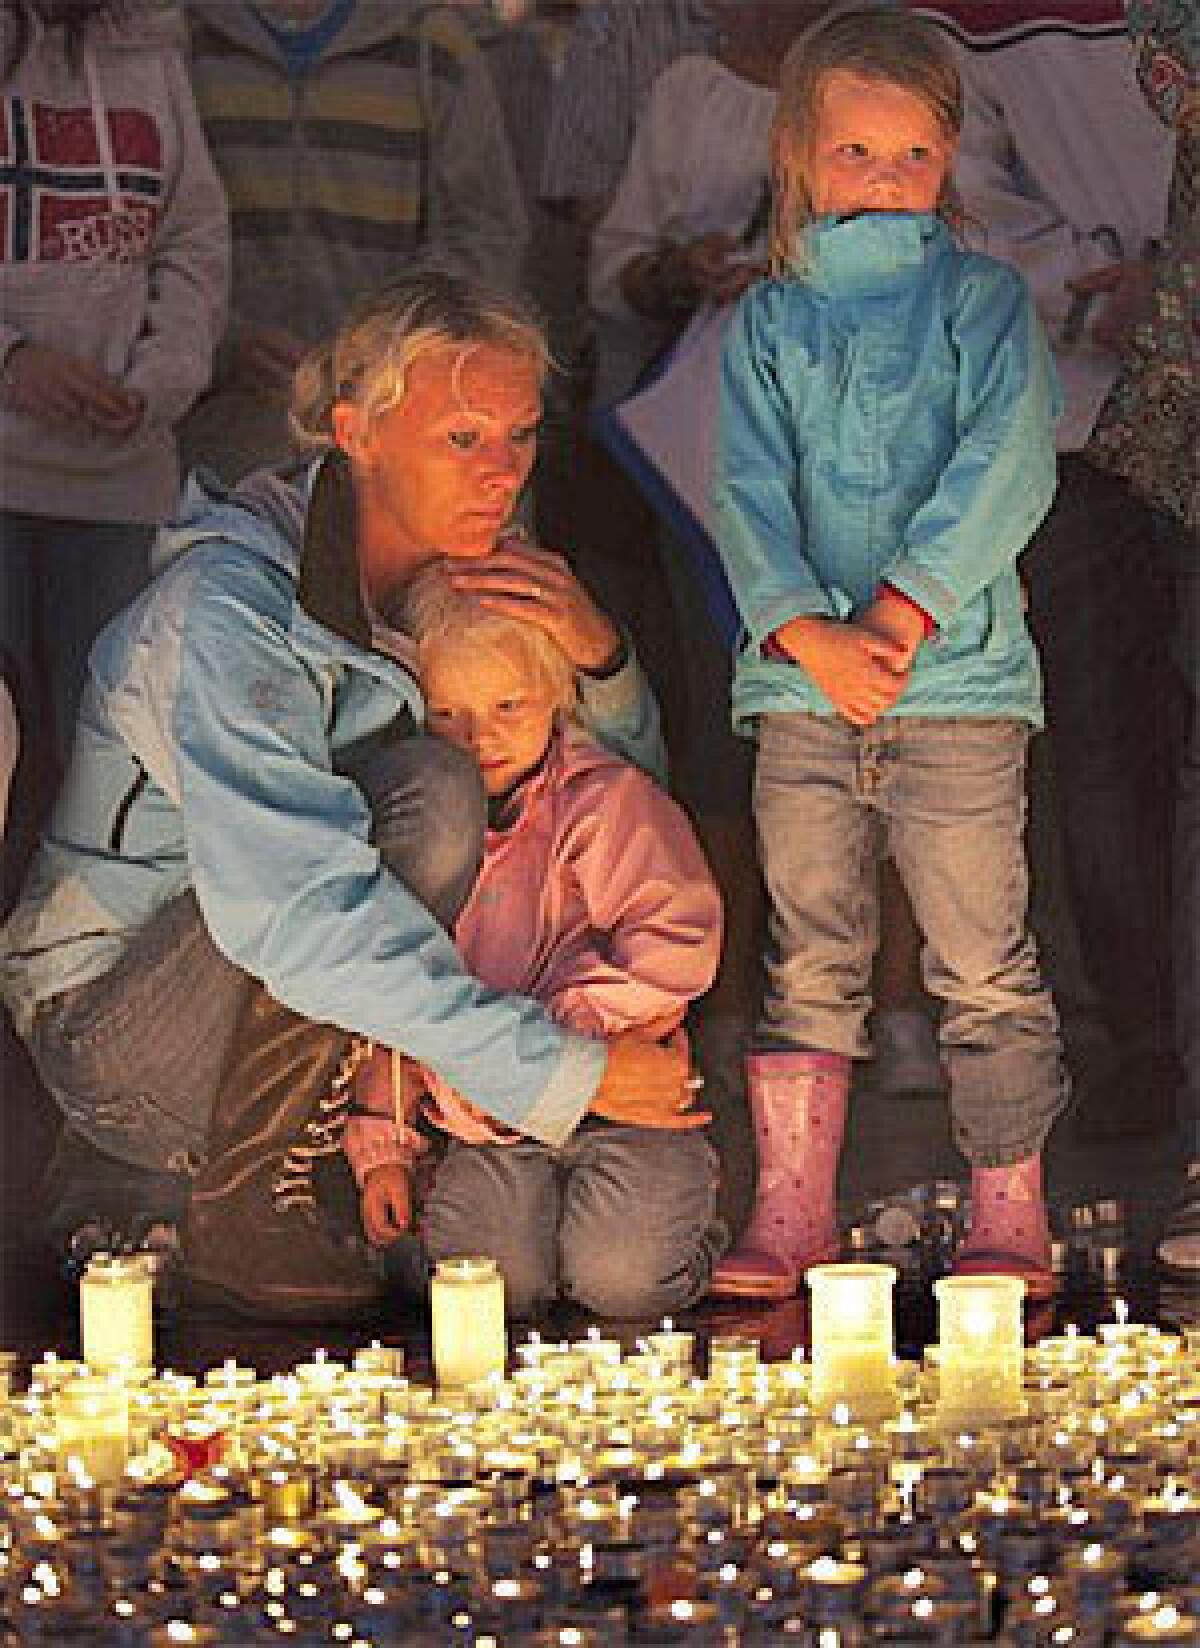 Friends and loved ones gather at the Oslo cathedral to mourn victims killed in a bombing and mass shooting in Norway in July 2011.